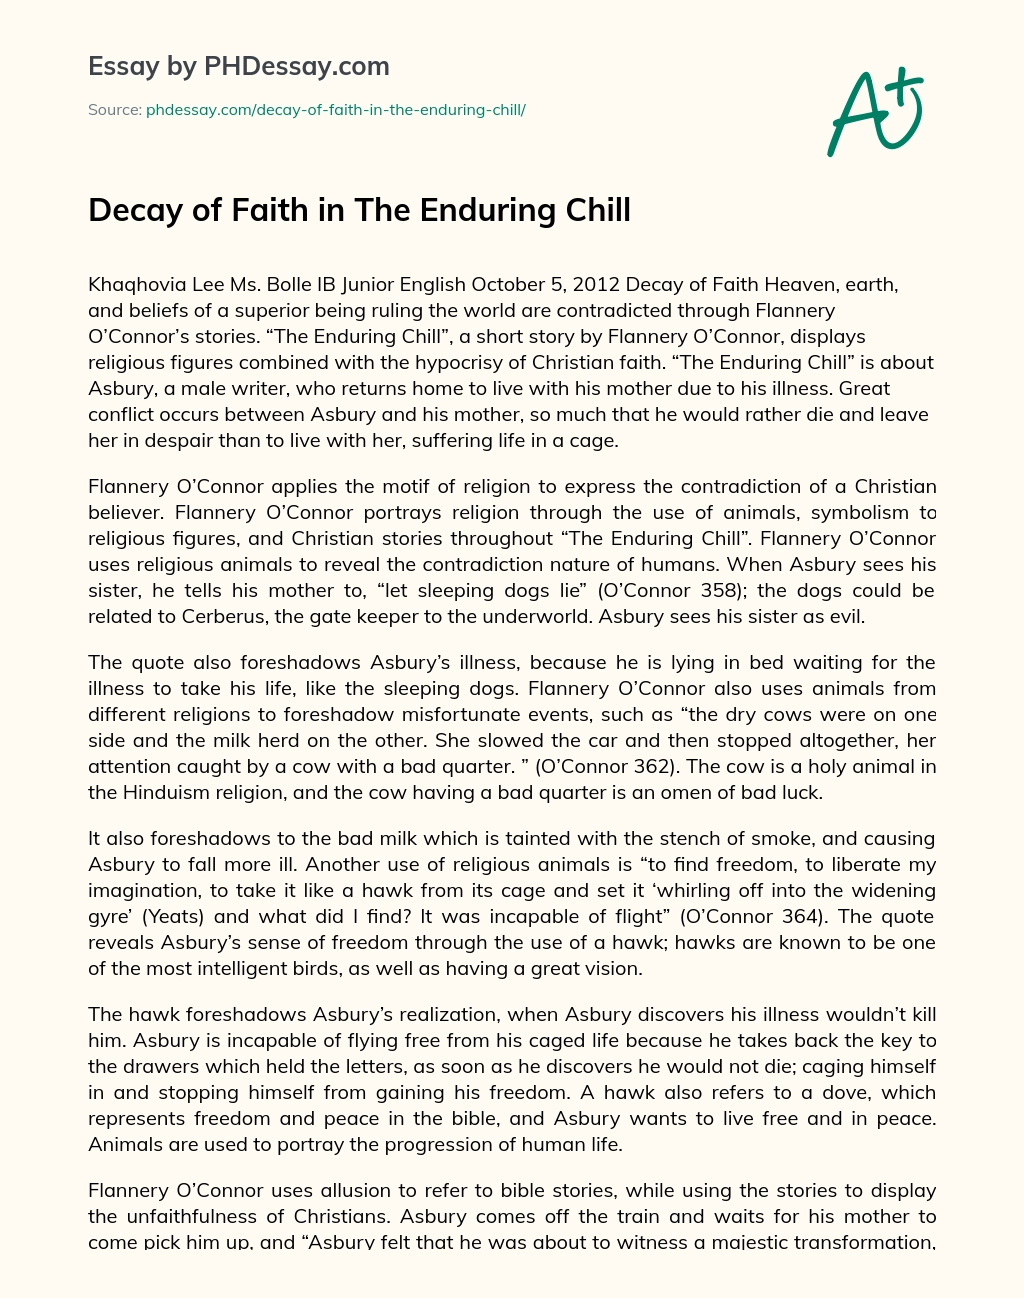 Decay of Faith in The Enduring Chill essay